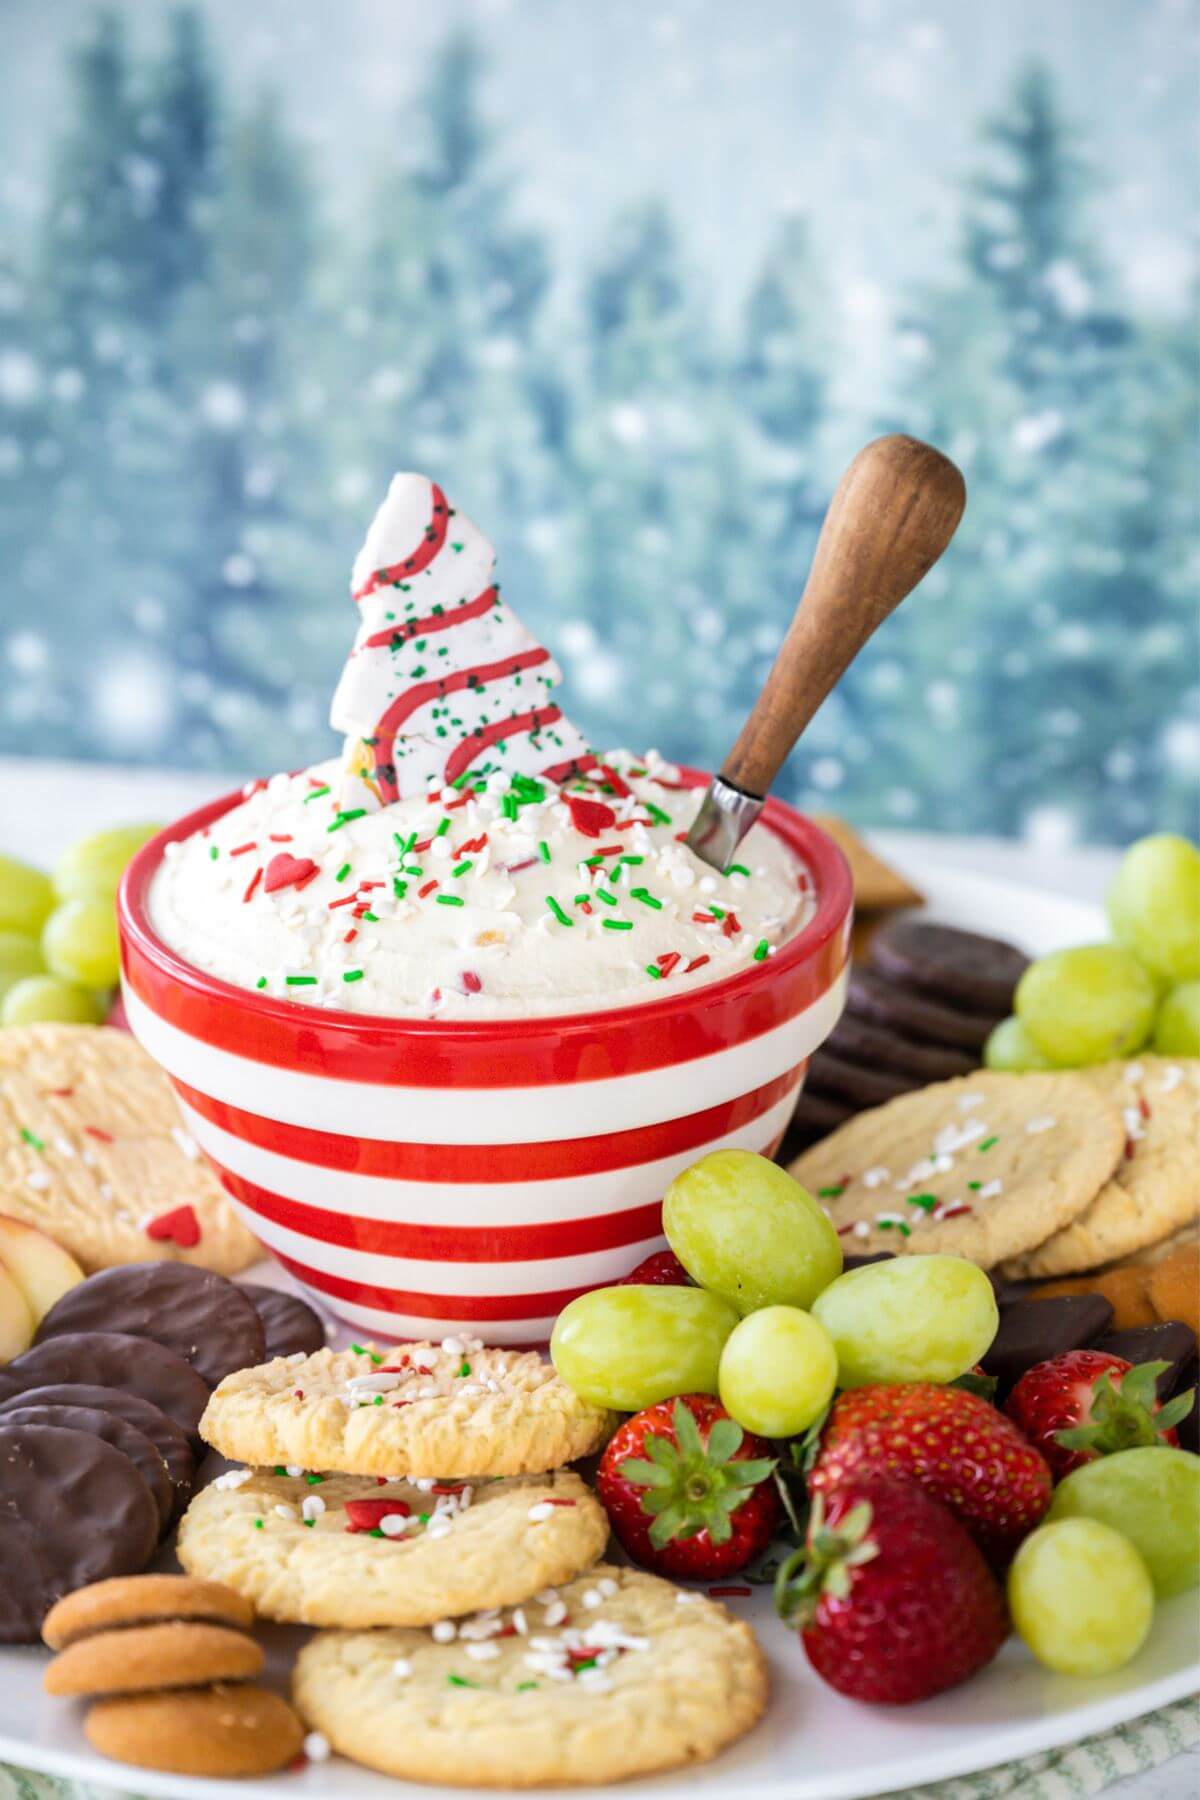 Side view of bowl of dip in center of platter with cookies, fruit, chocolate dippers.